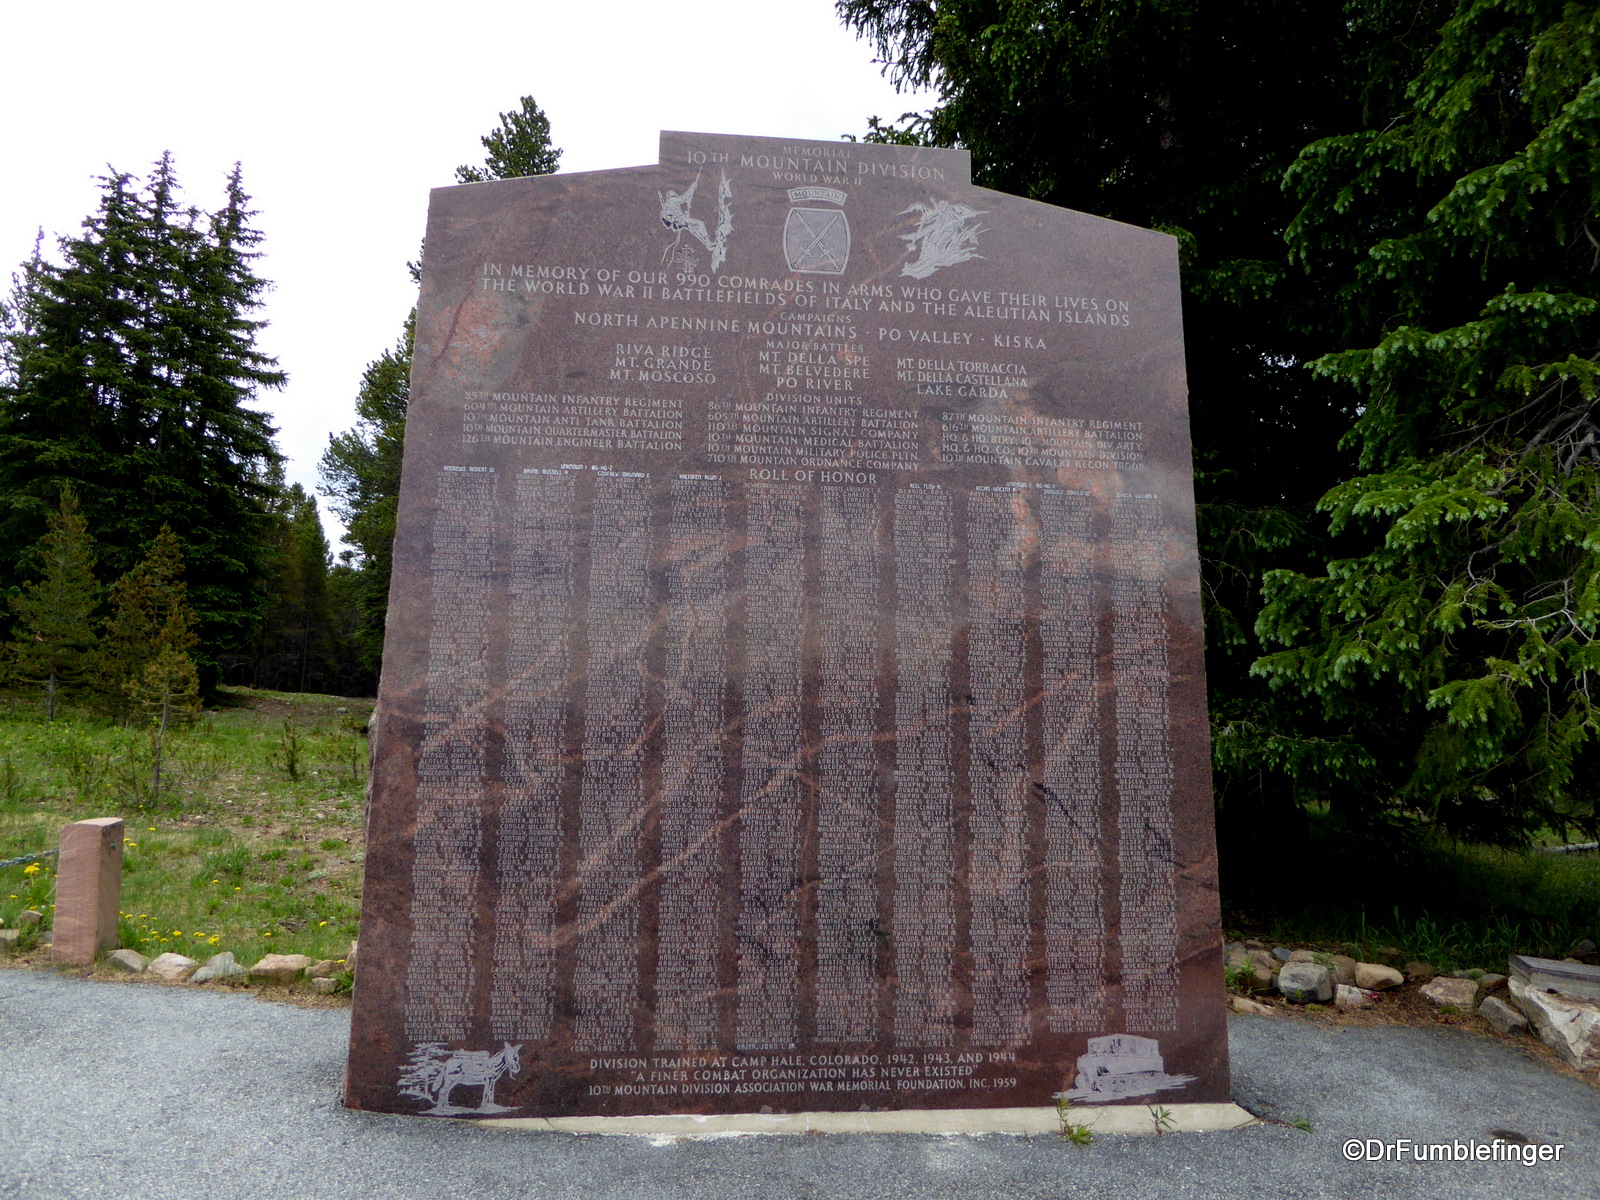 10th Mountain Division Memorial, Tennessee Pass